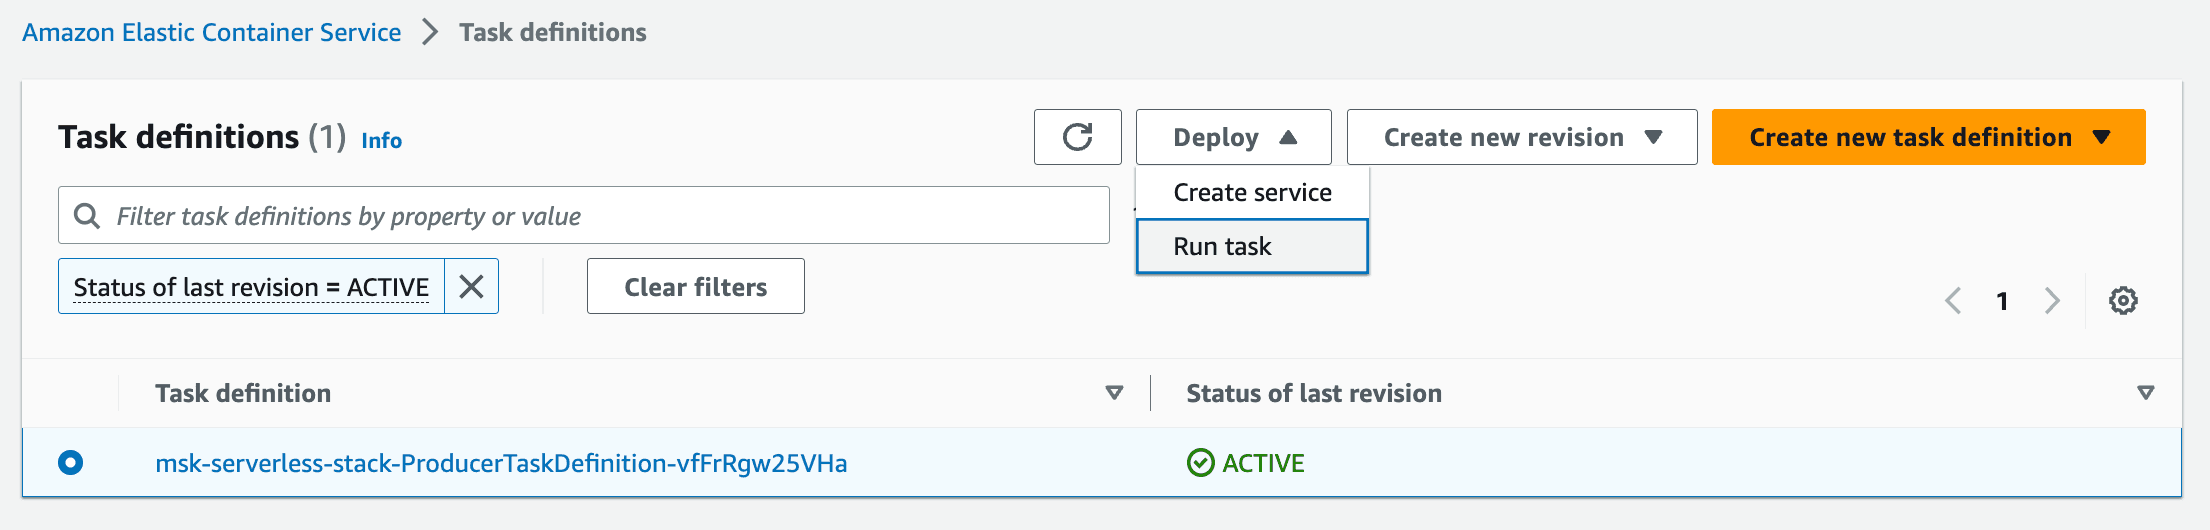 'Run task' option within the Task definitions in the ECS console